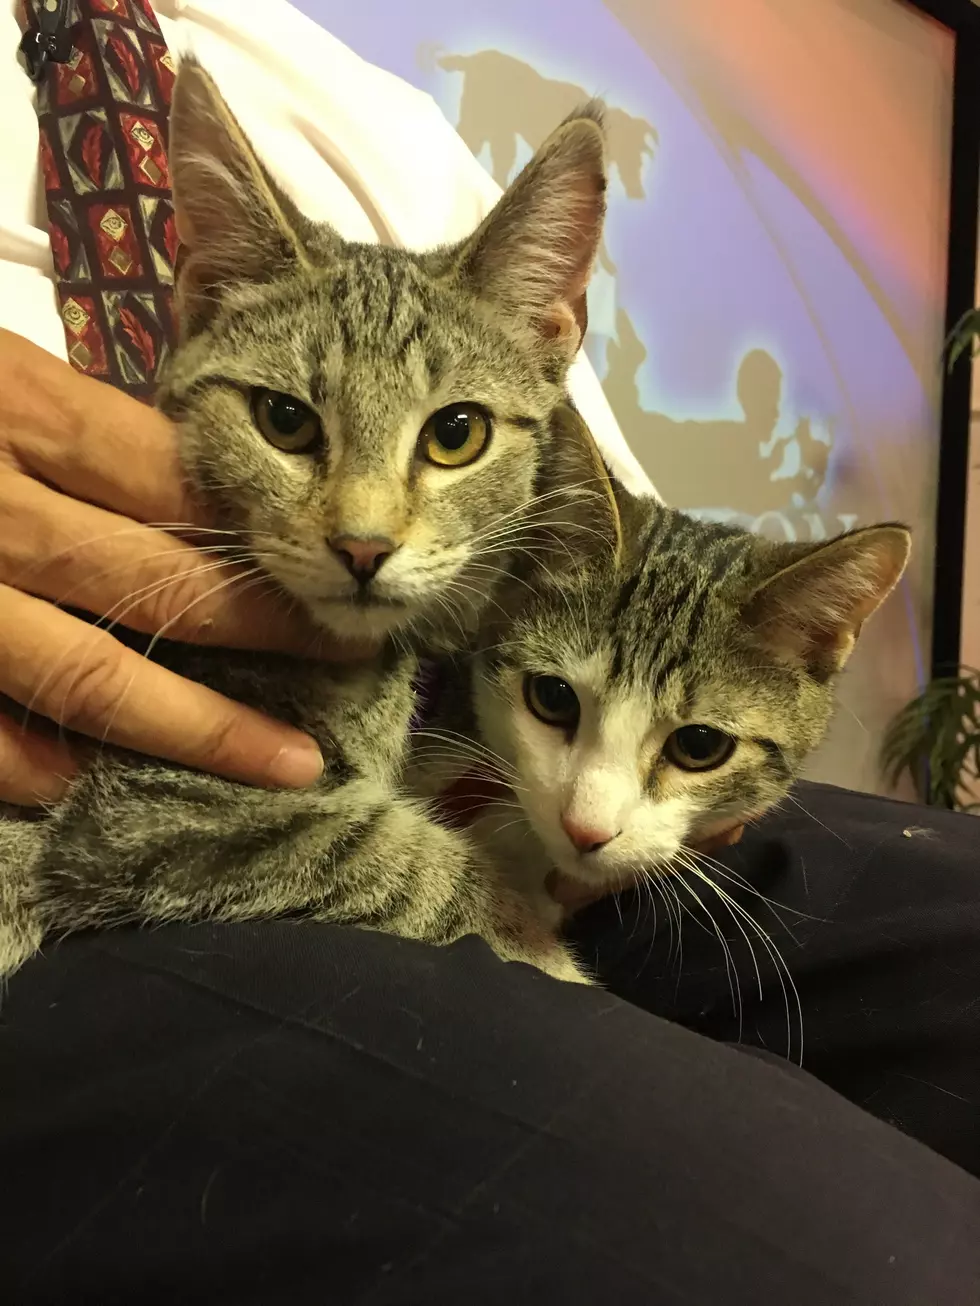 Sweetest Kittens Just Want to Snuggle and Purr [VIDEO]